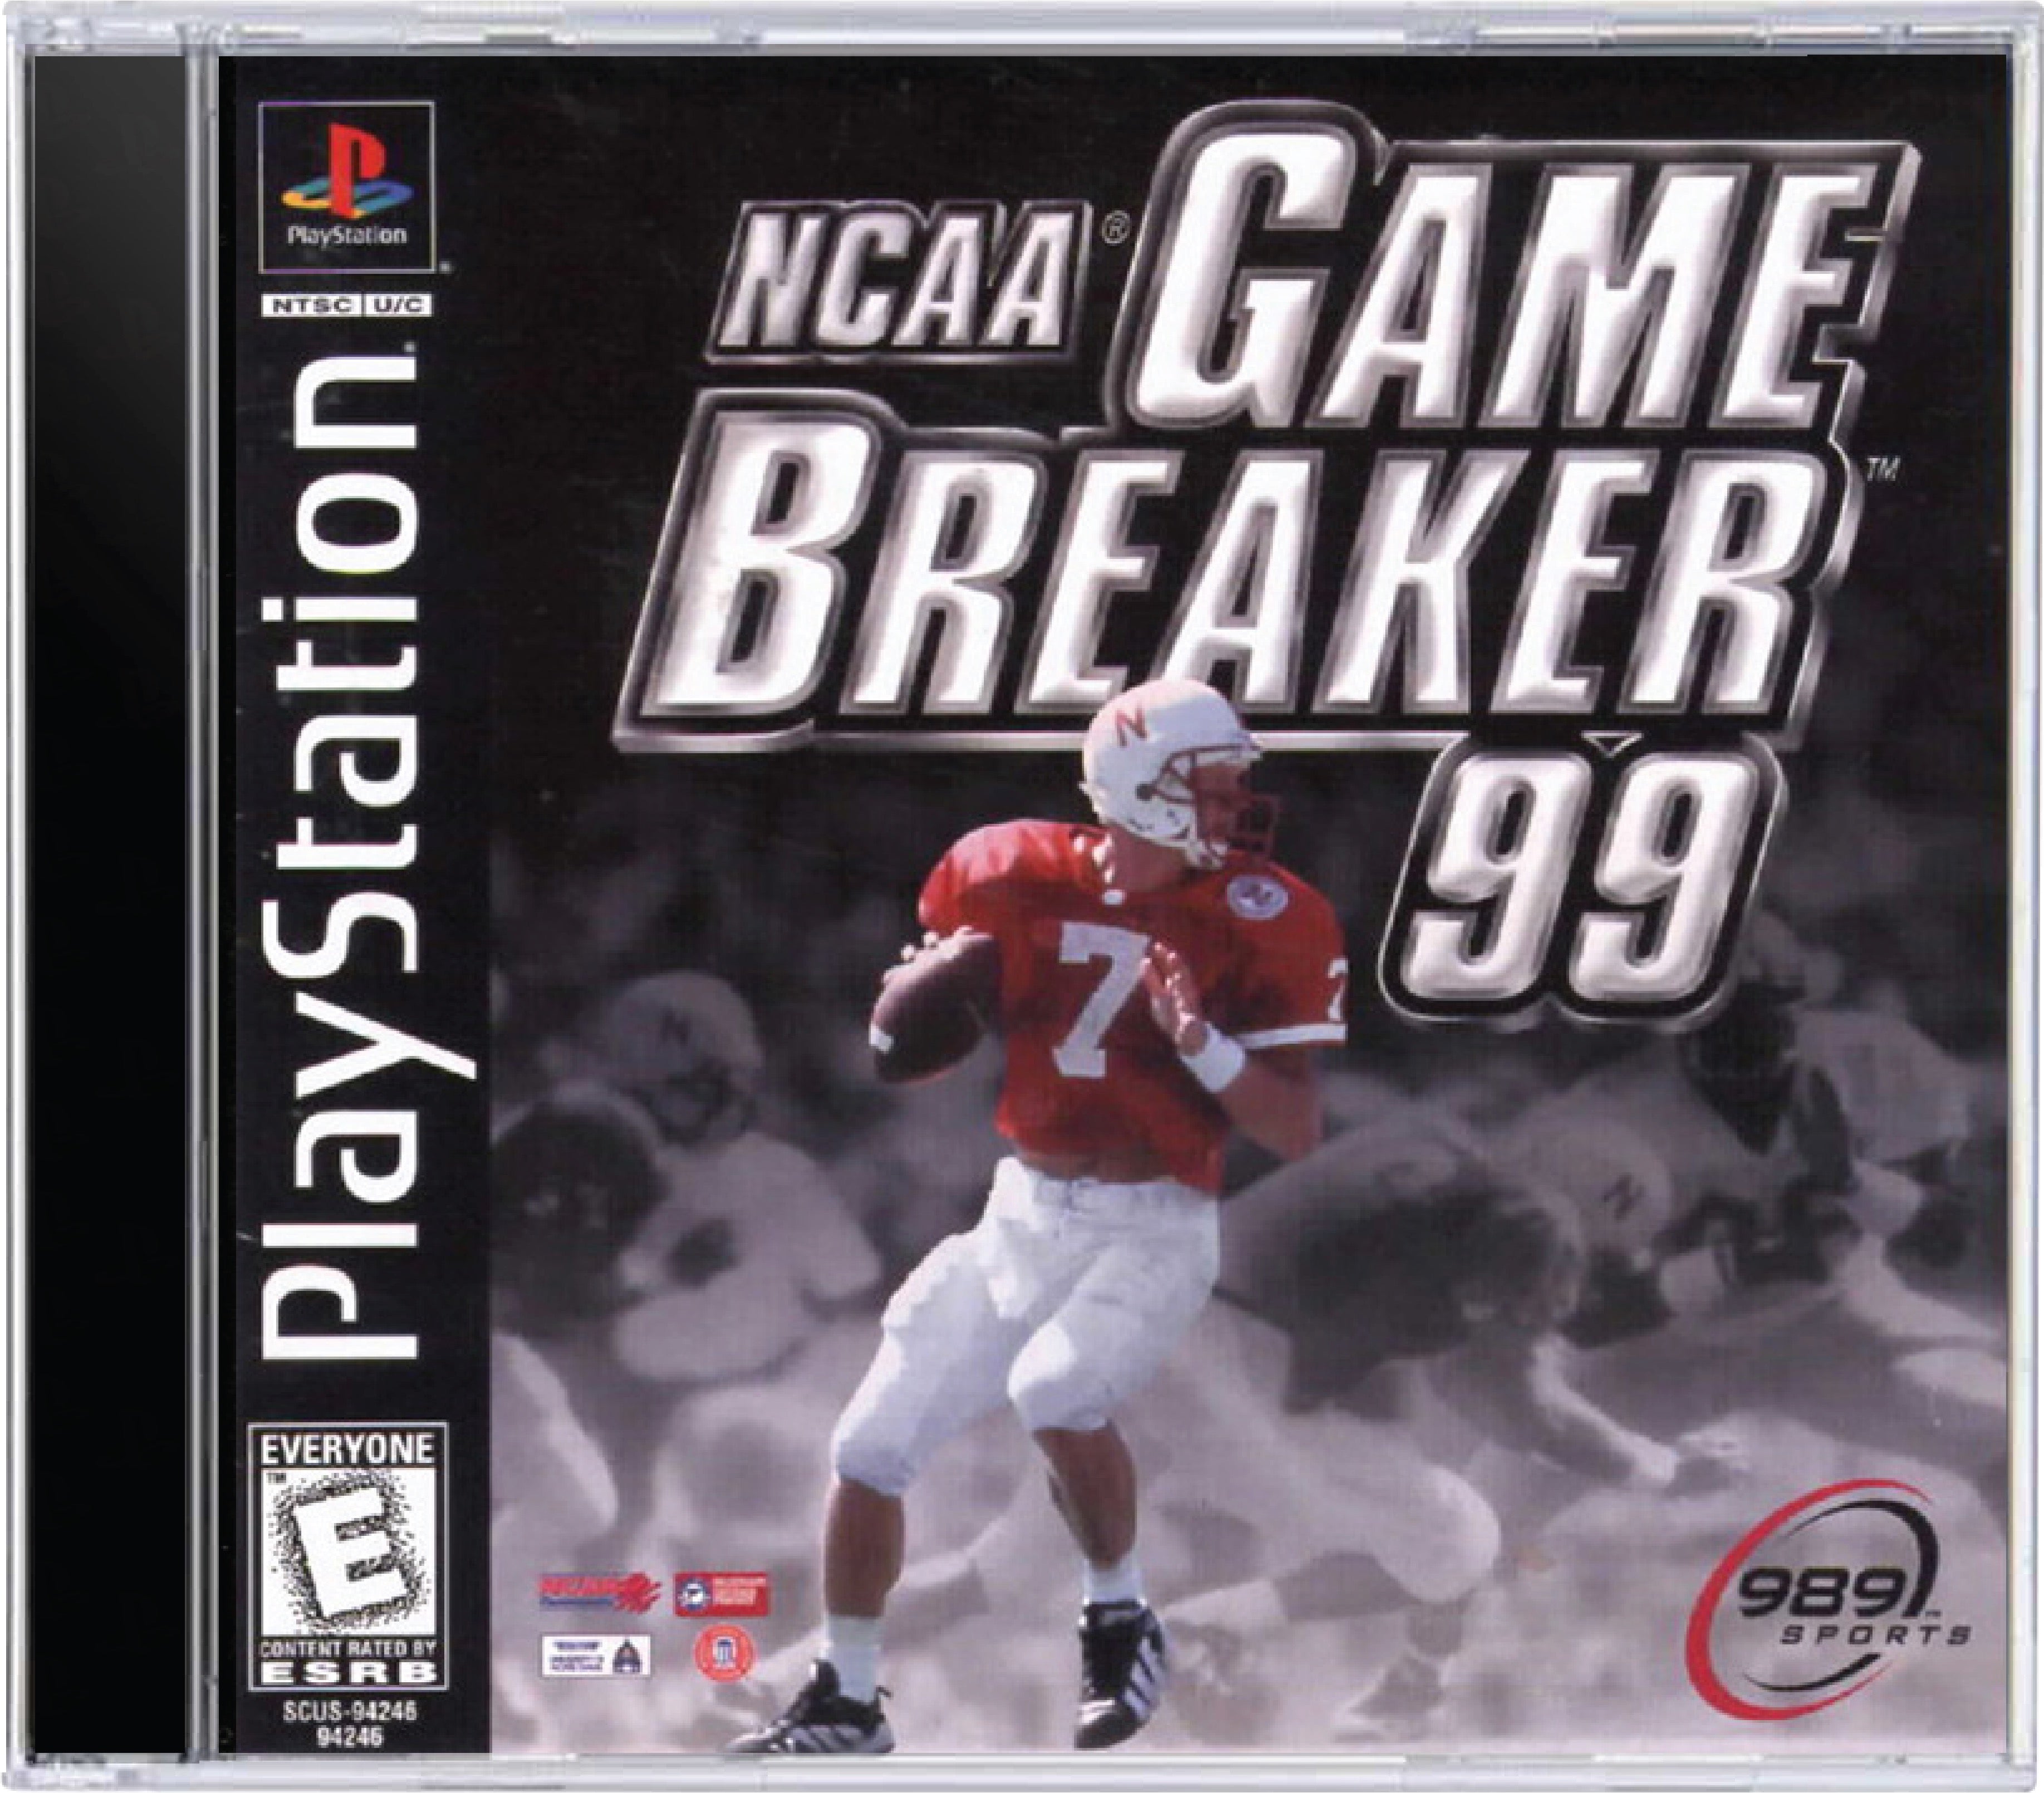 NCAA Gamebreaker 99 Cover Art and Product Photo